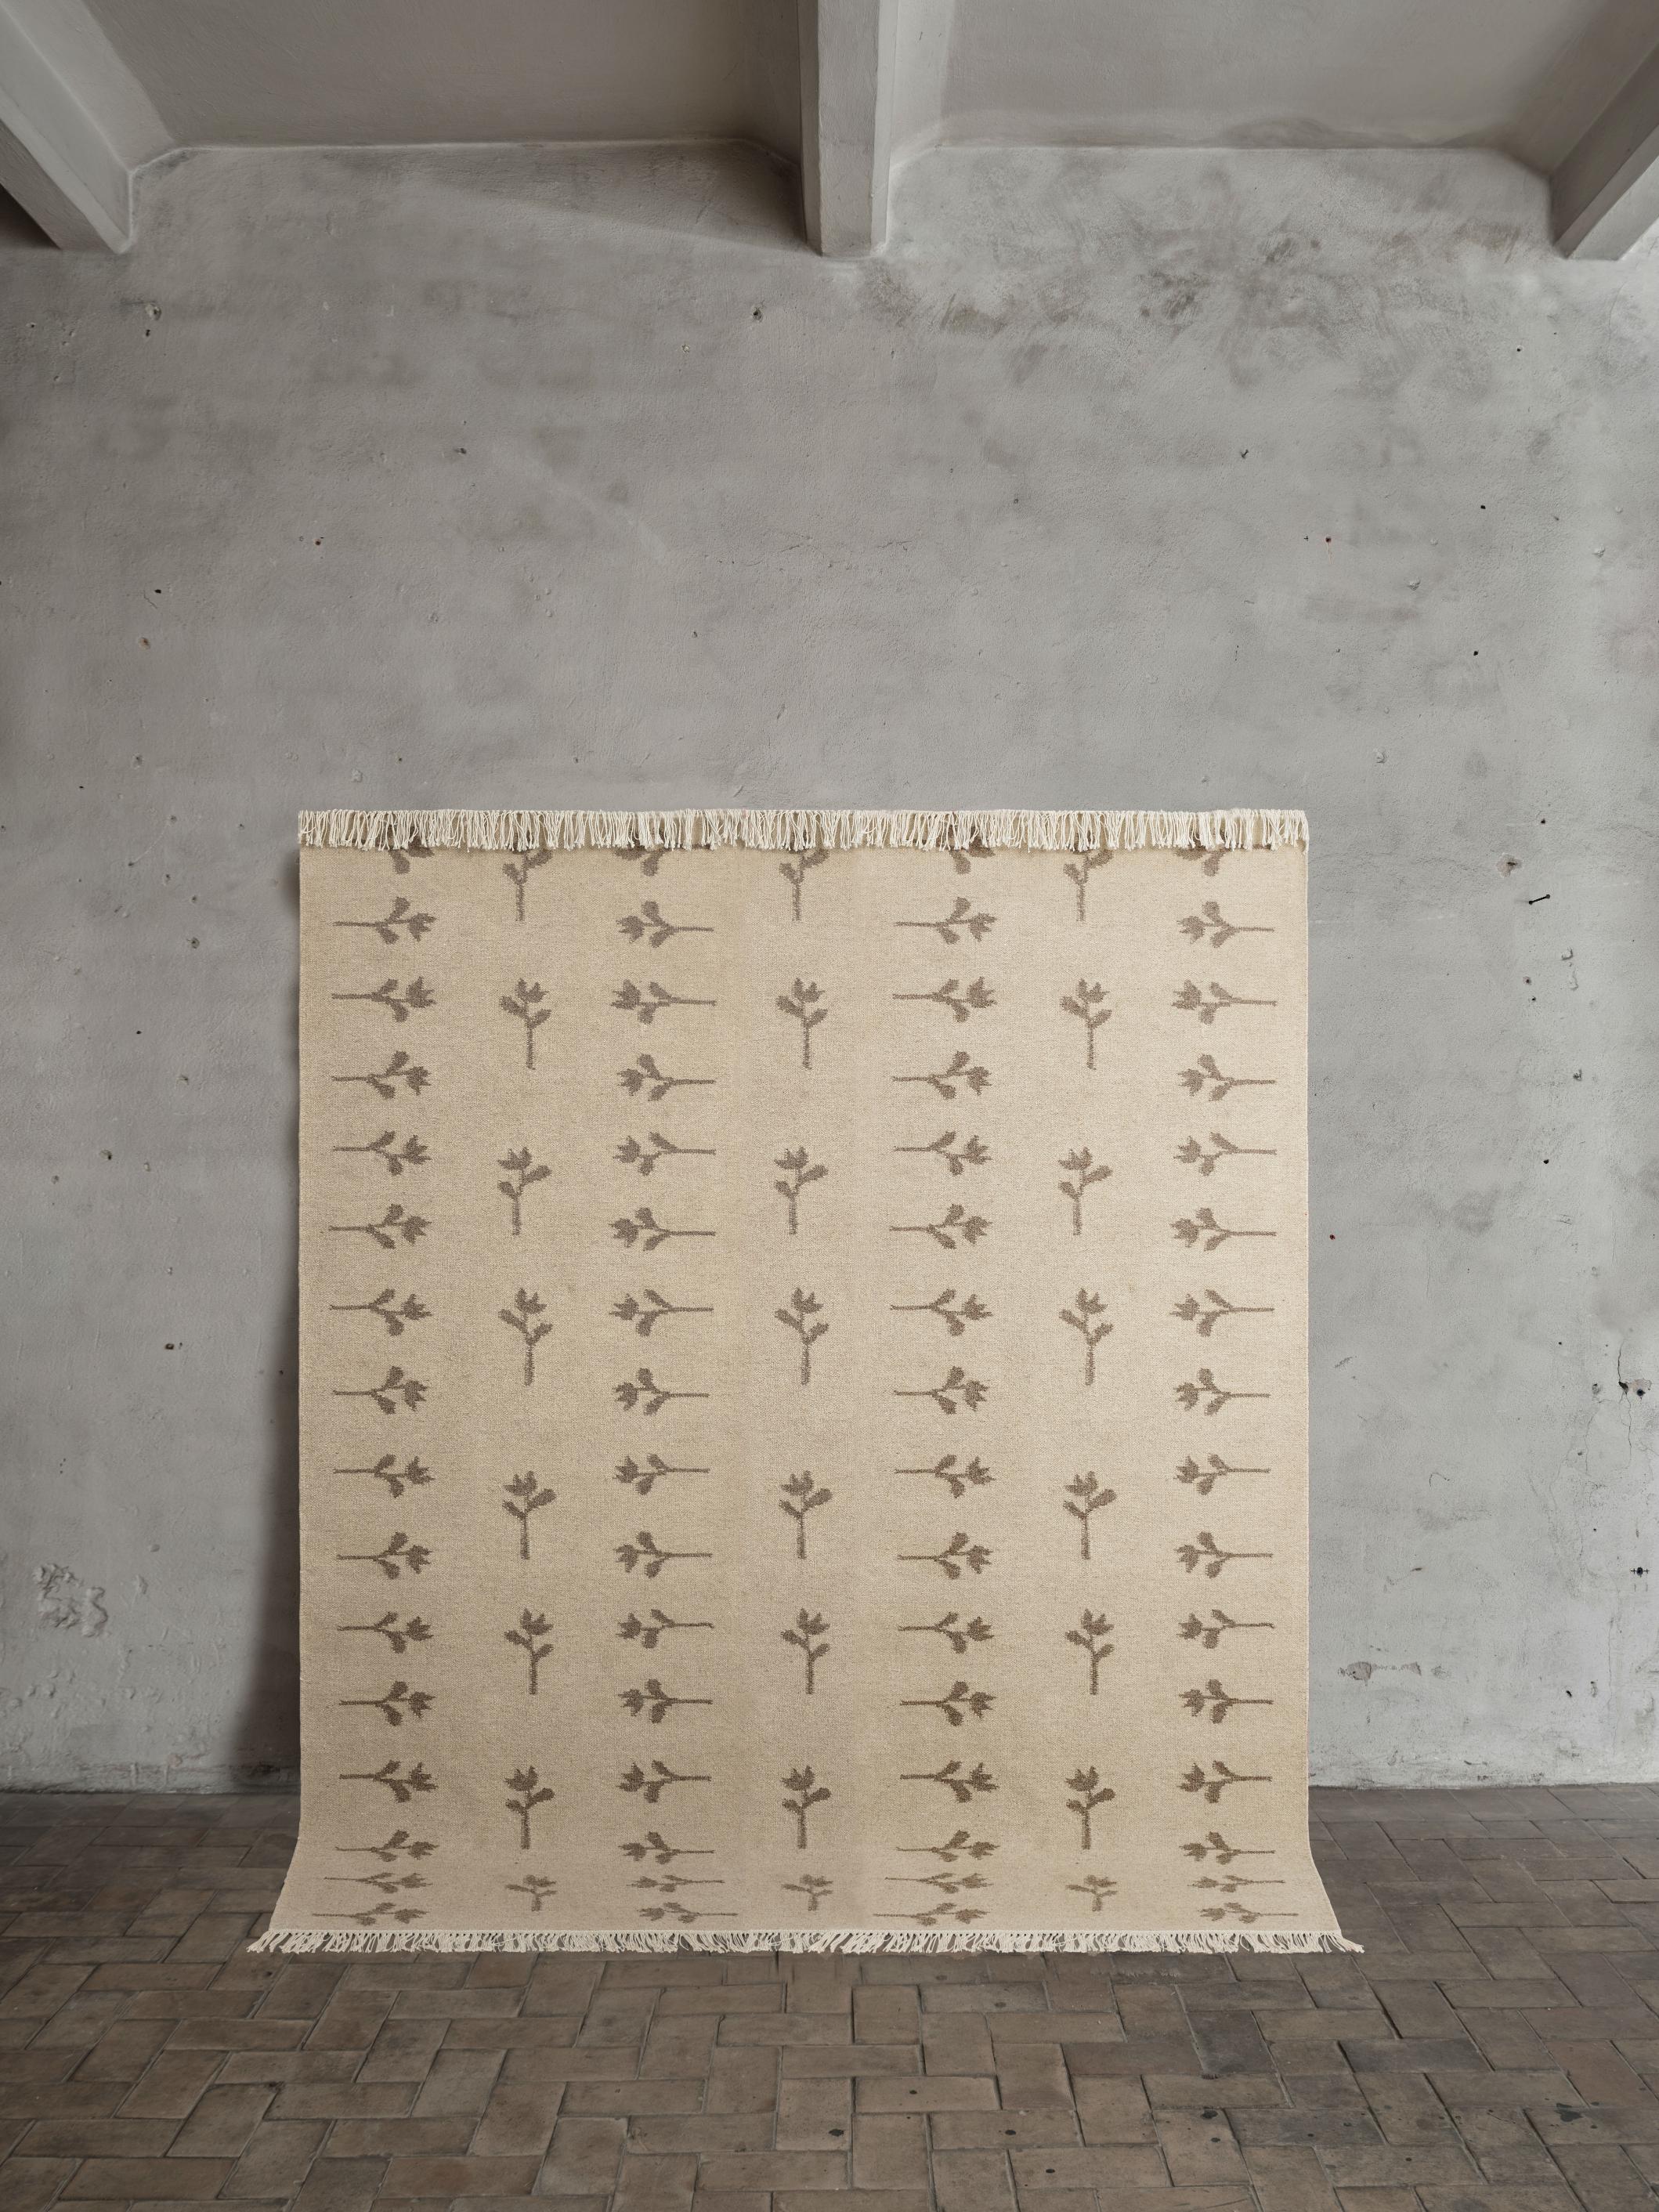 No.17 Rug by Cappelen Dimyr
Dimensions: D 230 x H 280 cm (excl. fringes)
Materials: 85% wool, 15% cotton

Rug no.17 is a light flat-woven, handmade rug in natural wool. The rug is designed in a mid-beige foundation with soft-brown woven flowers for